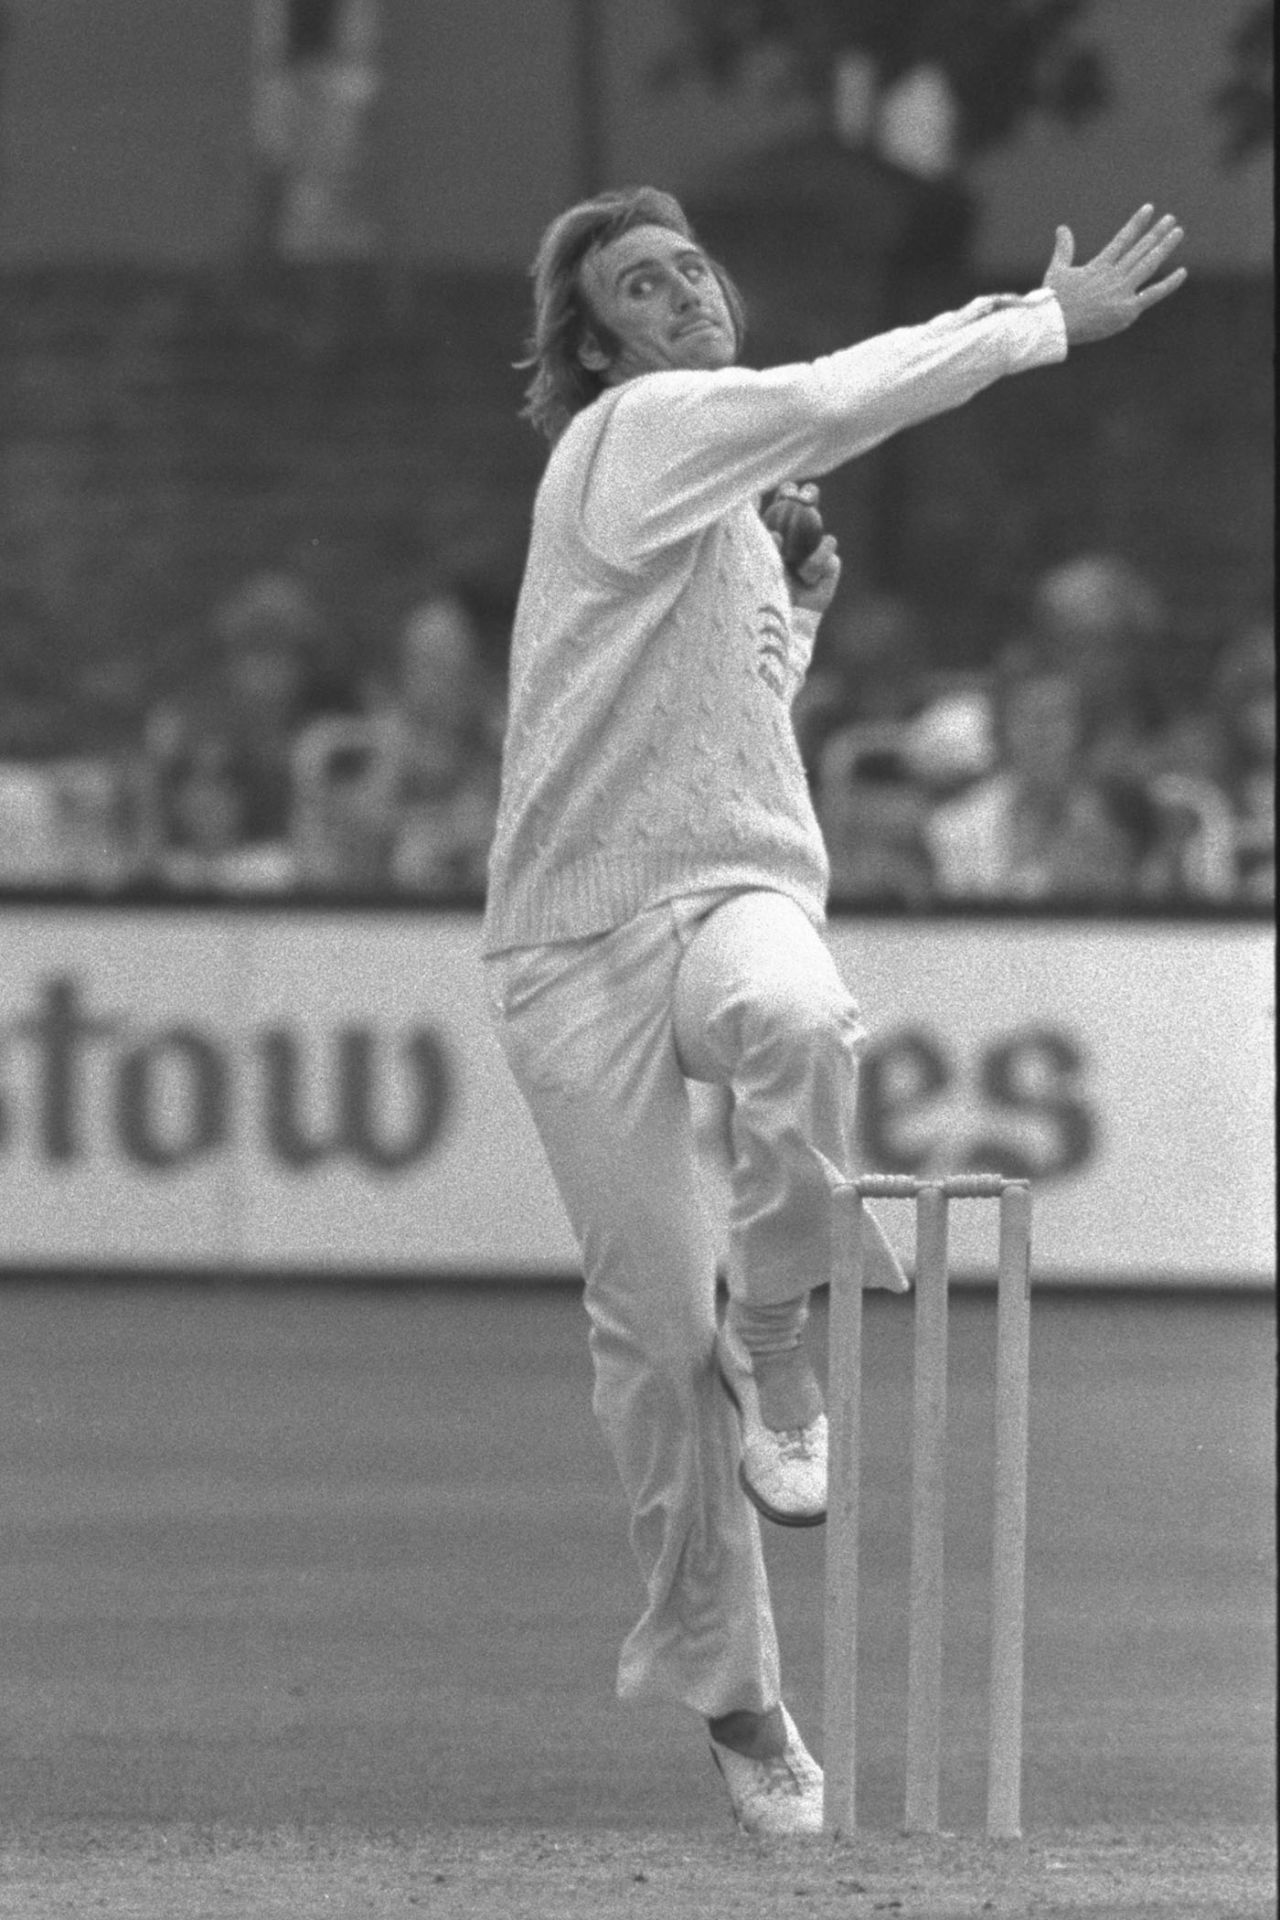 John Lever gets into his delivery stride, Colchester, August 1, 1979